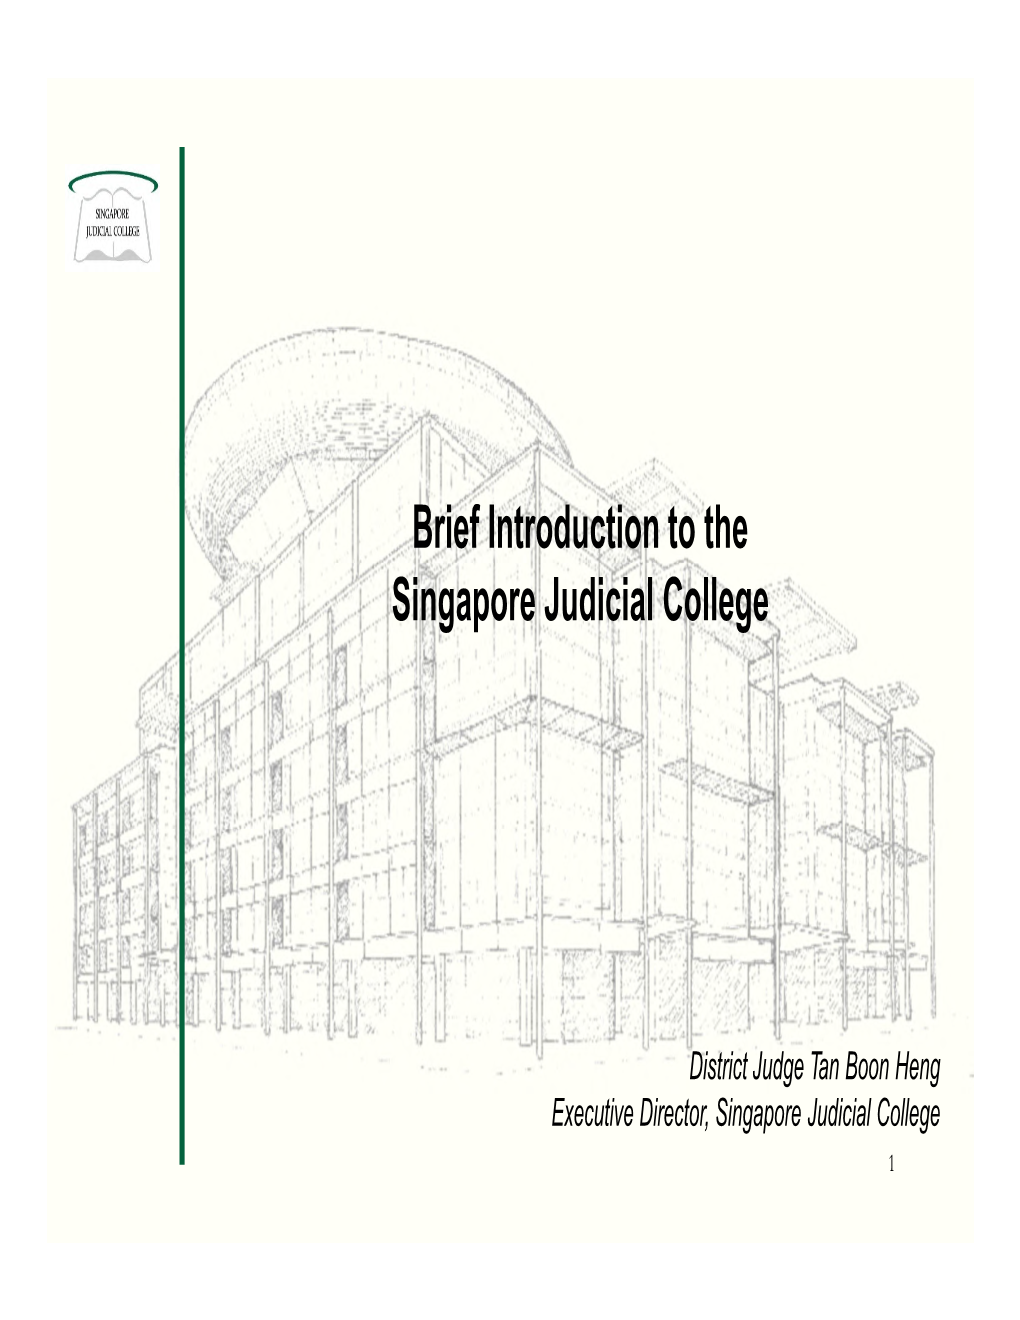 Brief Introduction to the Singapore Judicial College